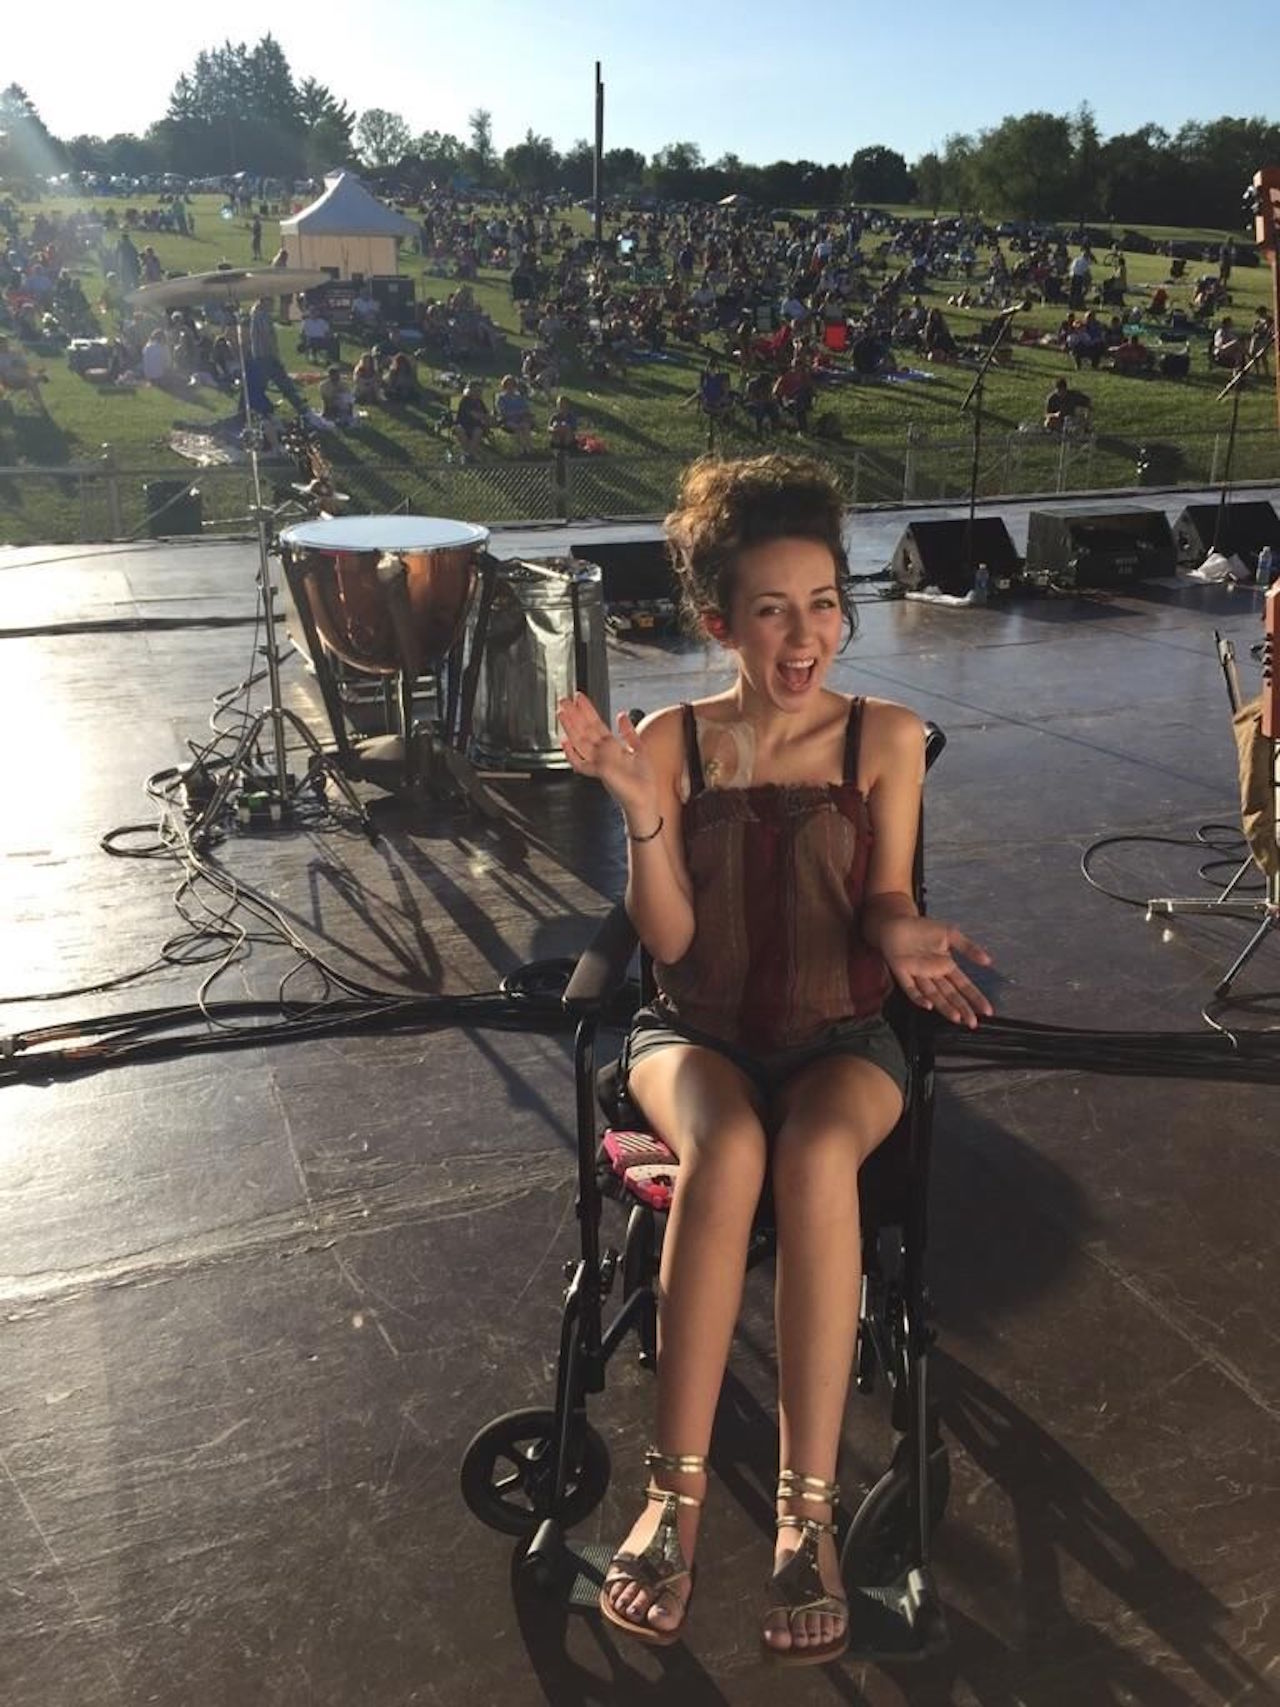 young woman sitting in a wheelchair on a stage looking over crowd of people